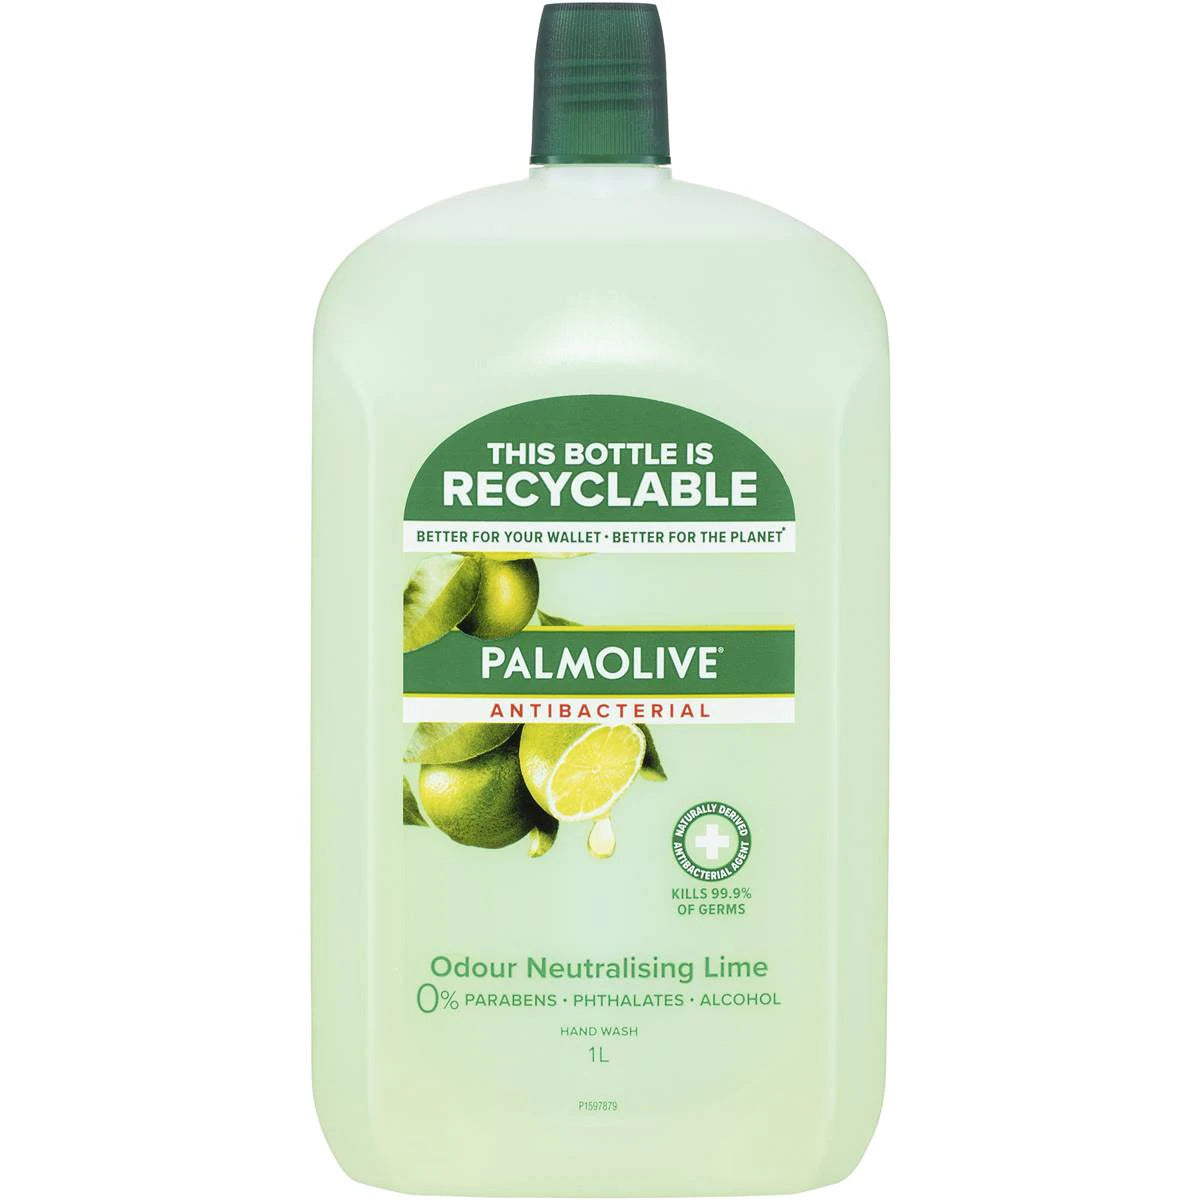 Palmolive Antibacterial Hand Wash Refill Lime 1L